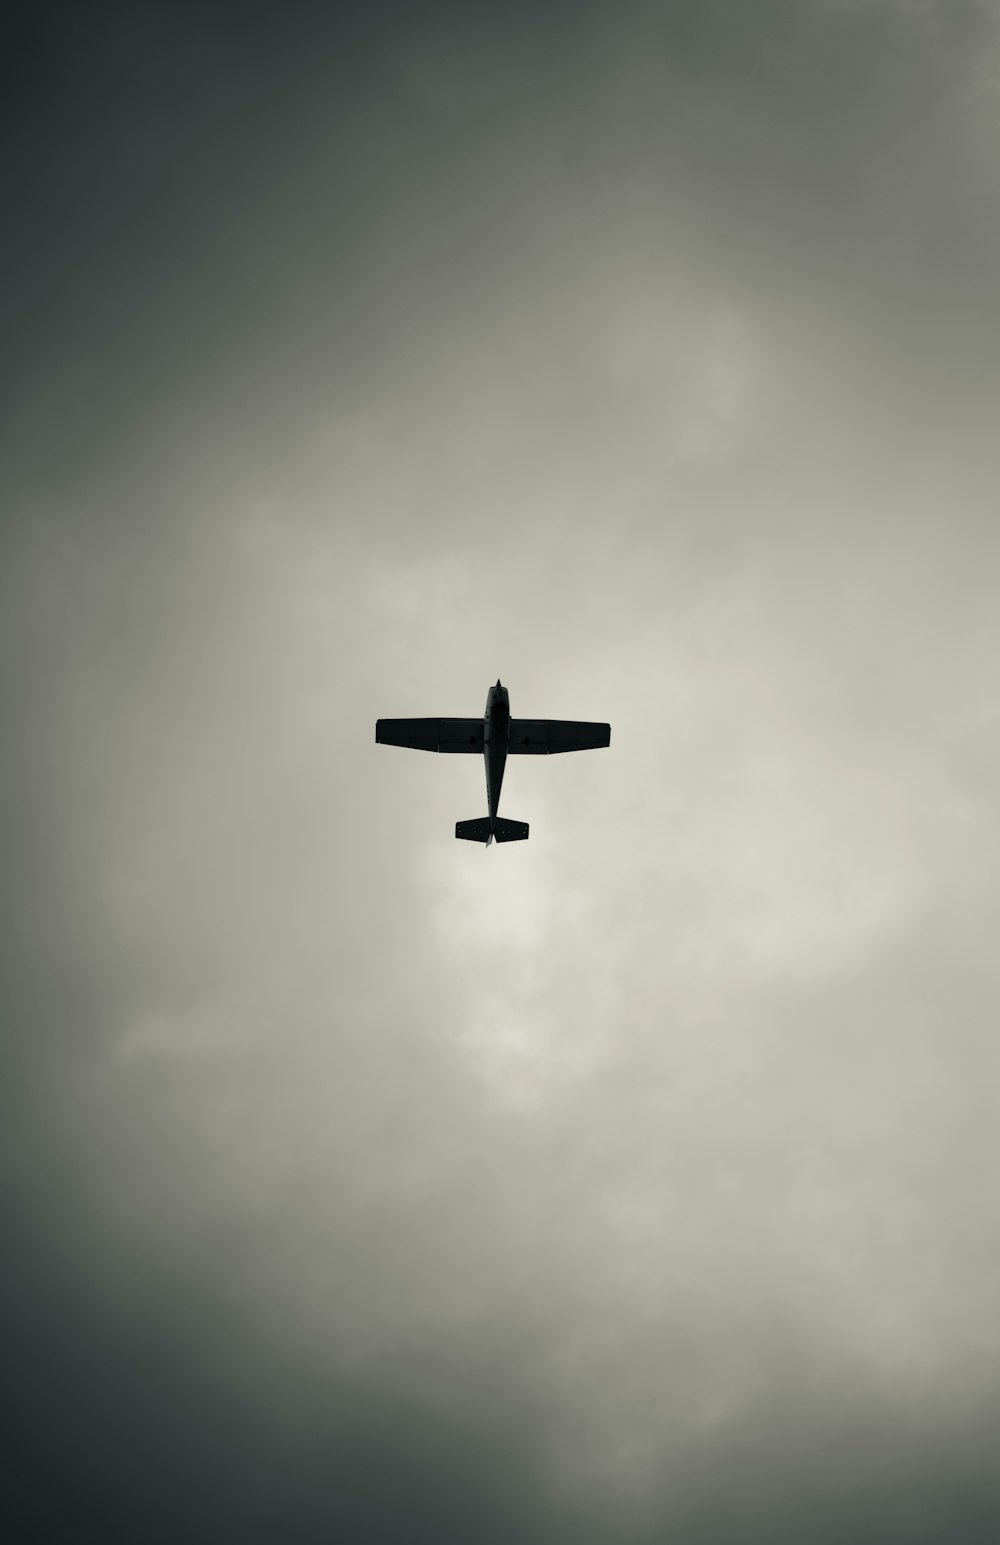 an airplane flying through a cloudy sky on a cloudy day